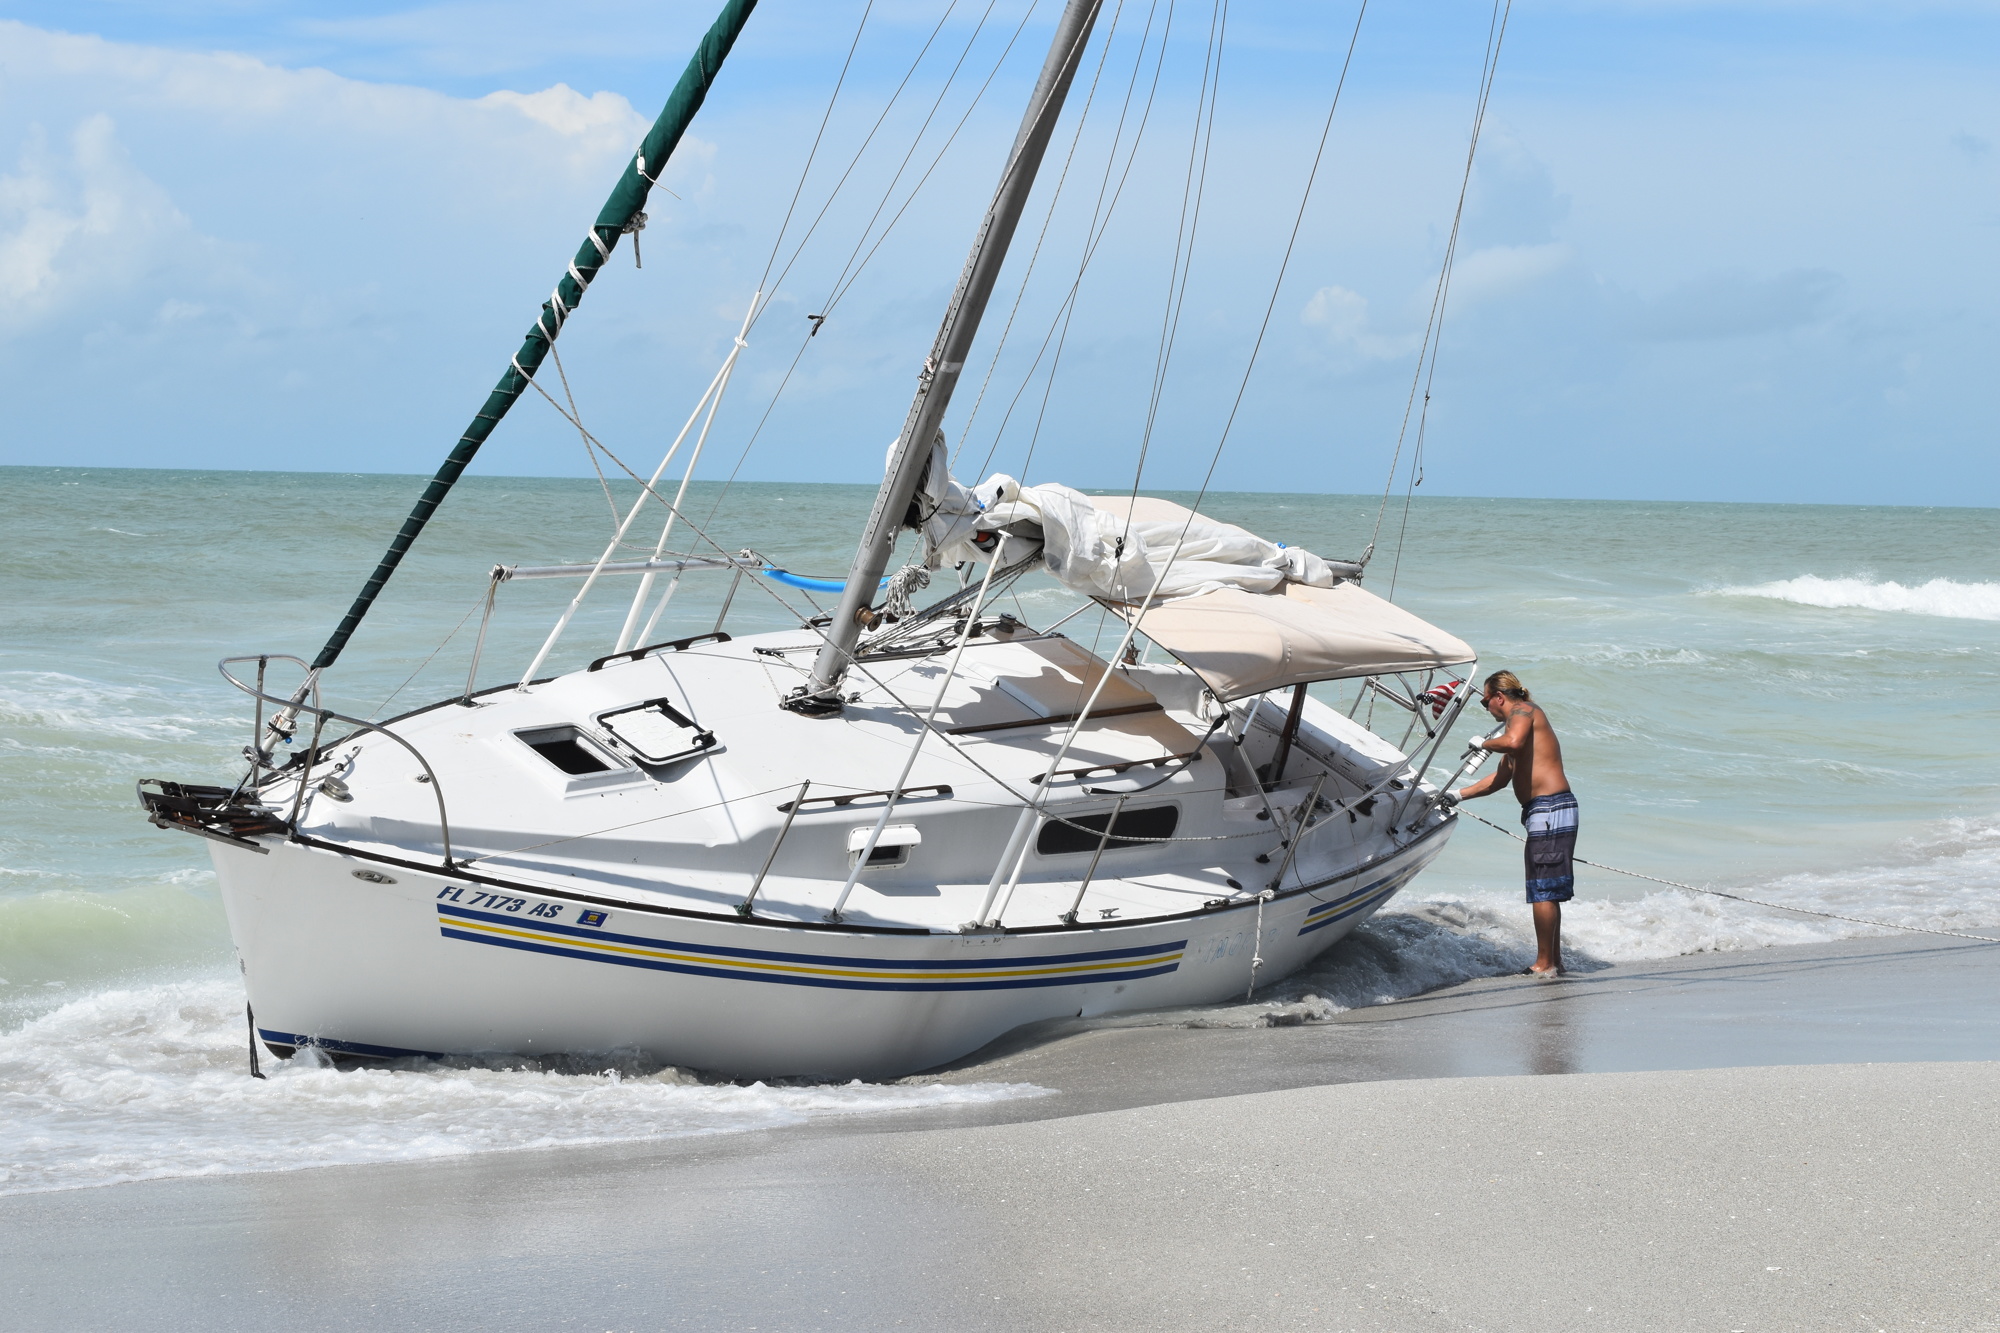 Mark Sternal's sailboat washed ashore near 4239 Gulf of Mexico Drive.